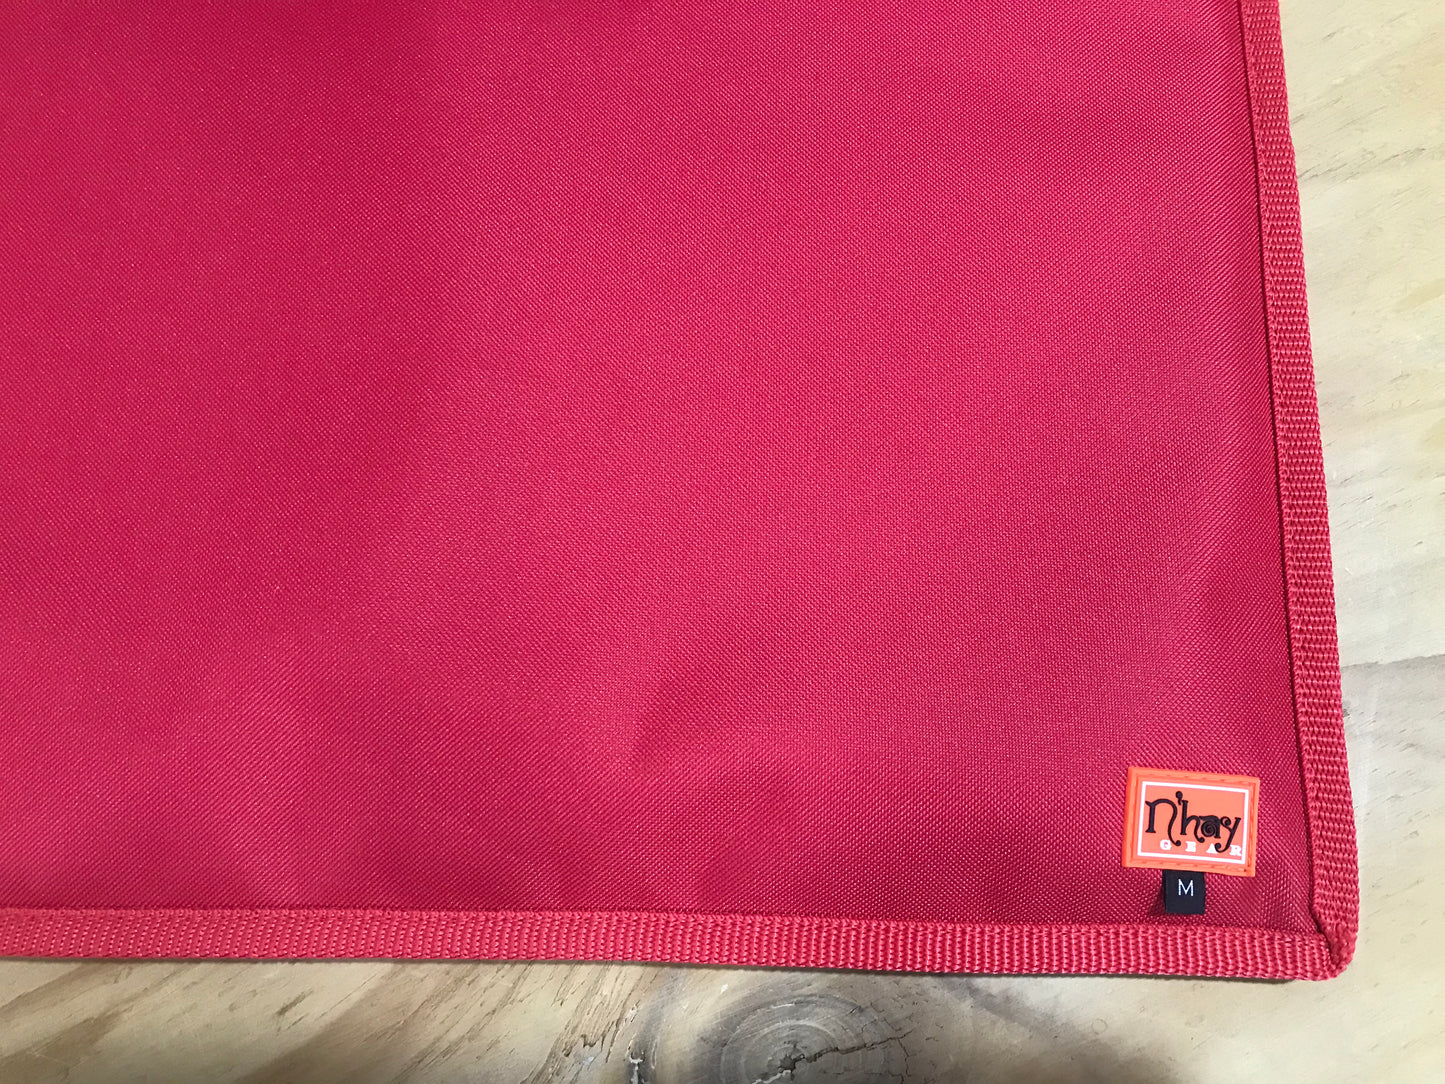 N'hay Dog Bed Cover - Acrylic